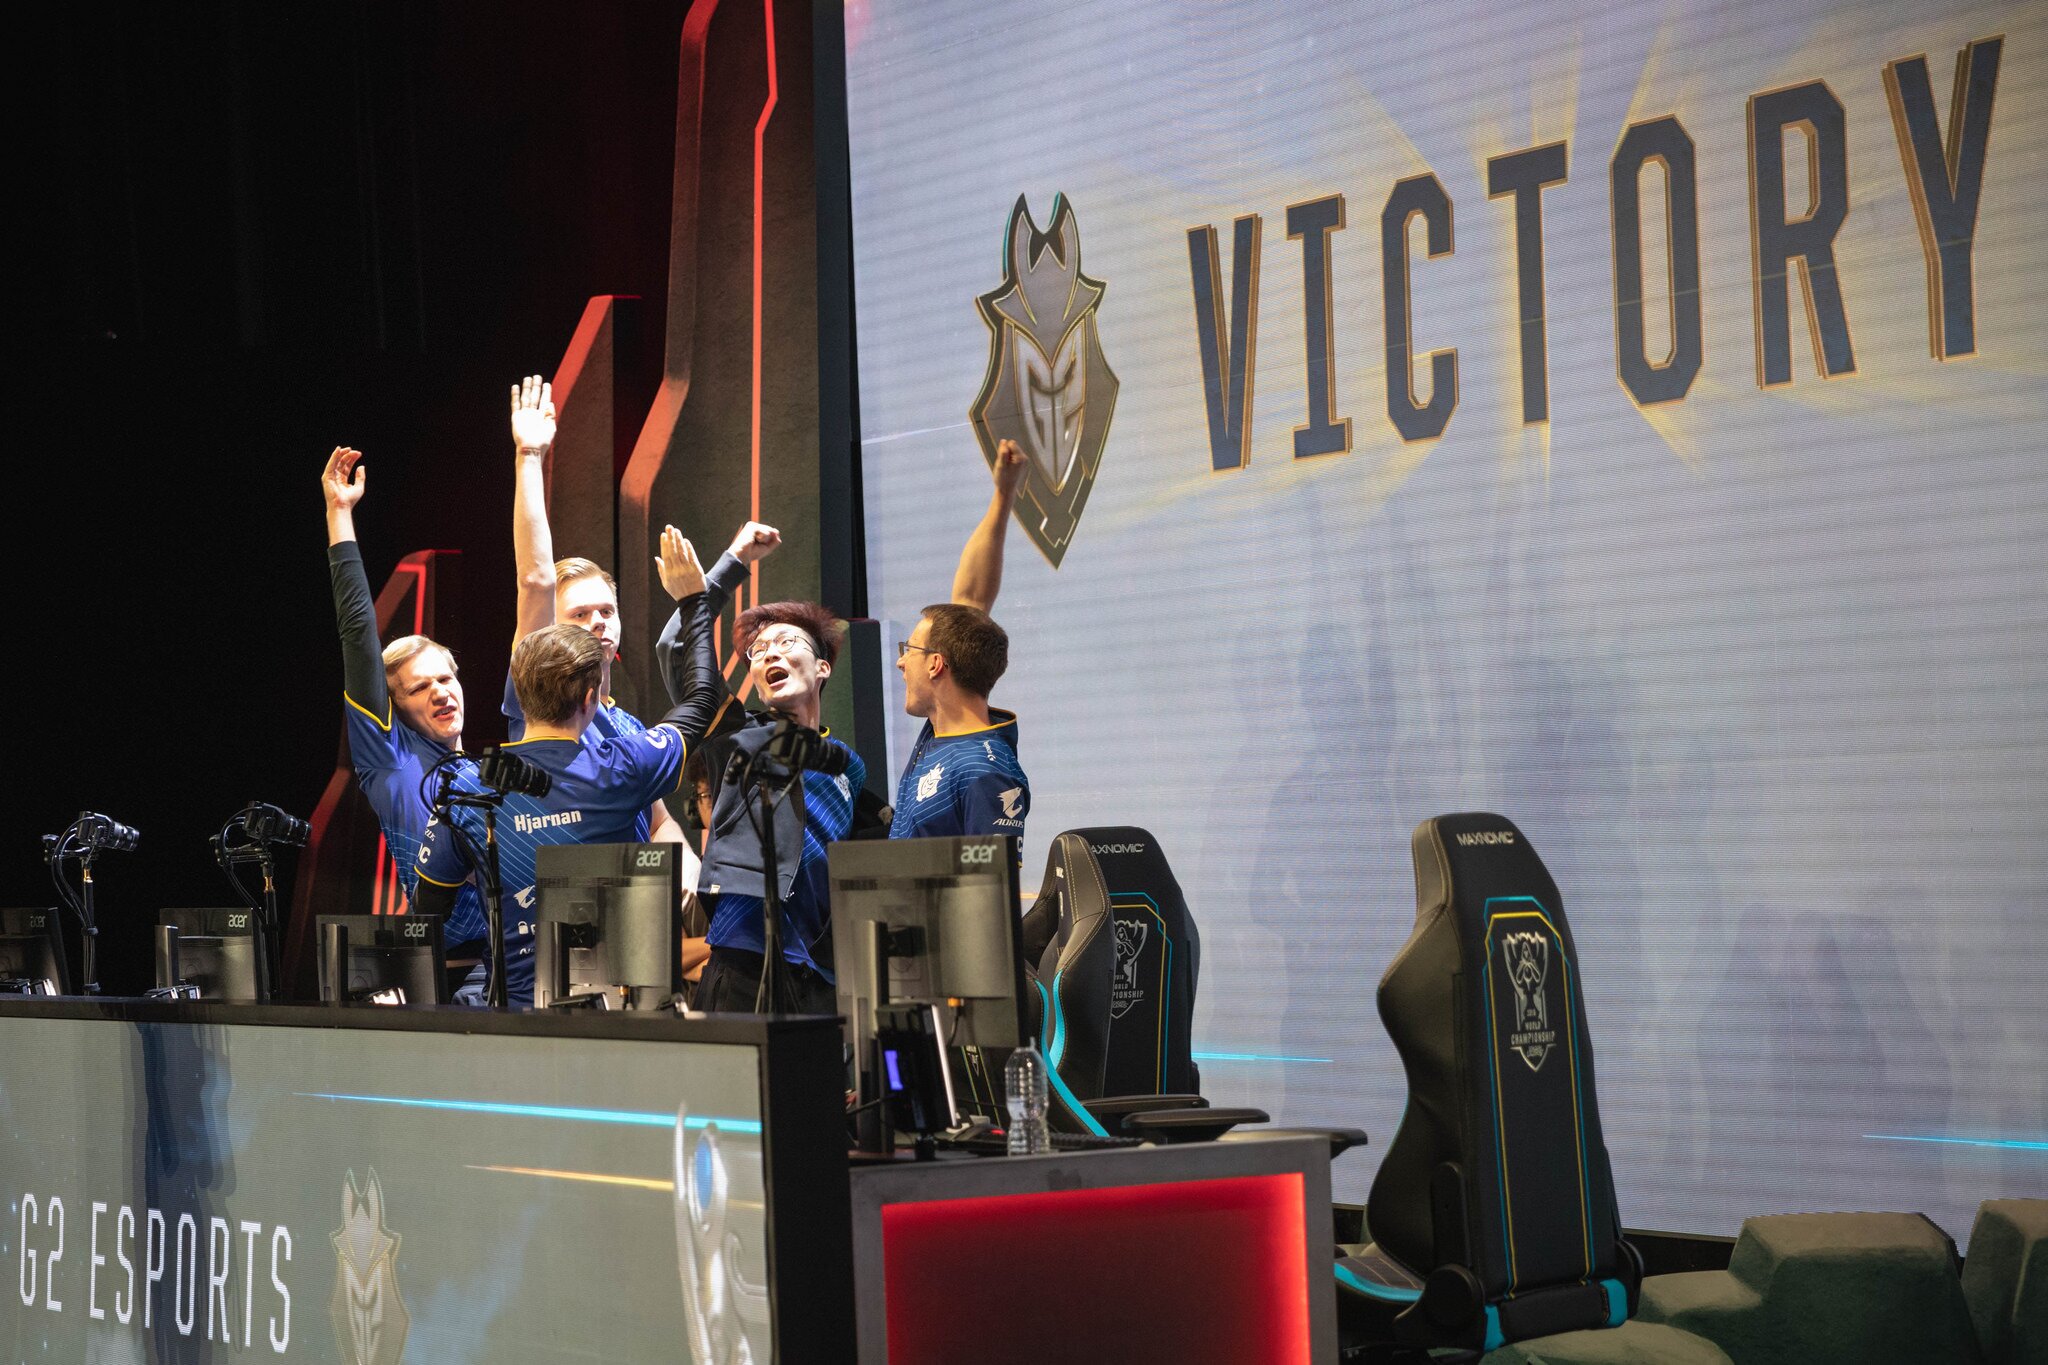 G2 pulled off the biggest upset of Day 4, topping the previously undefeated Flash Wolves.